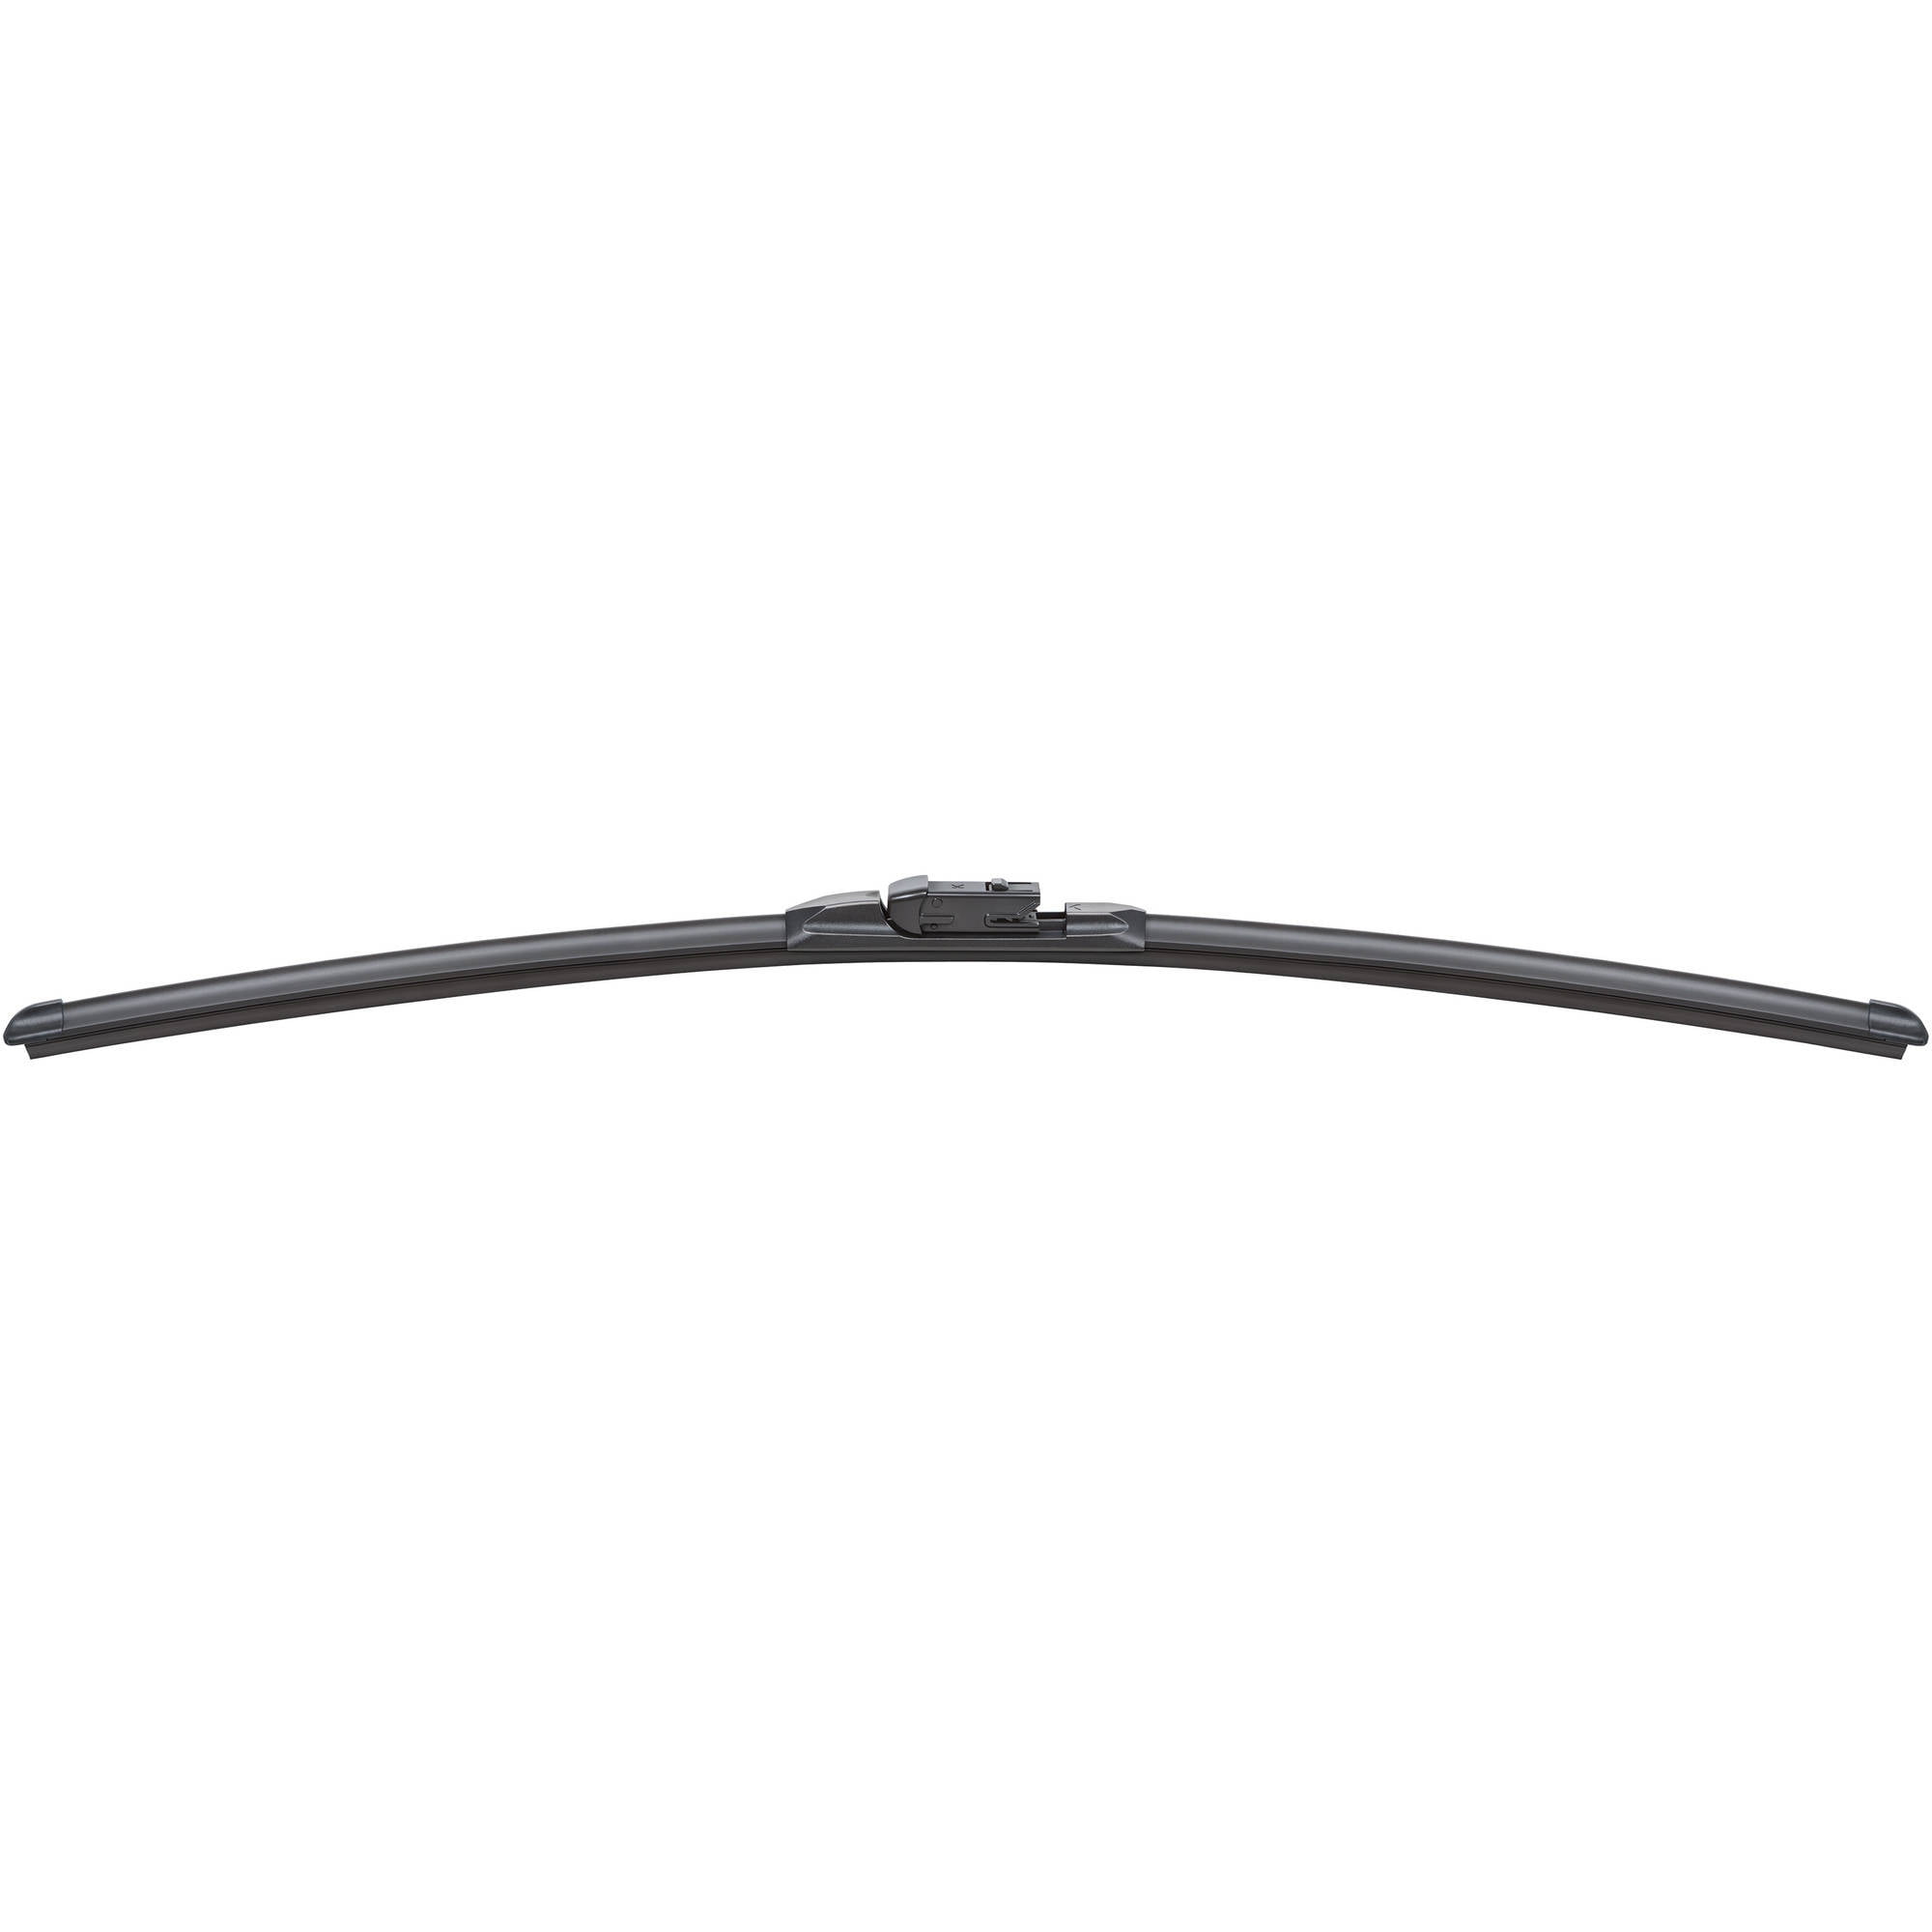 Windshield Wiper Blade-Exact Fit Factory Replacement Left Trico 24-17B 